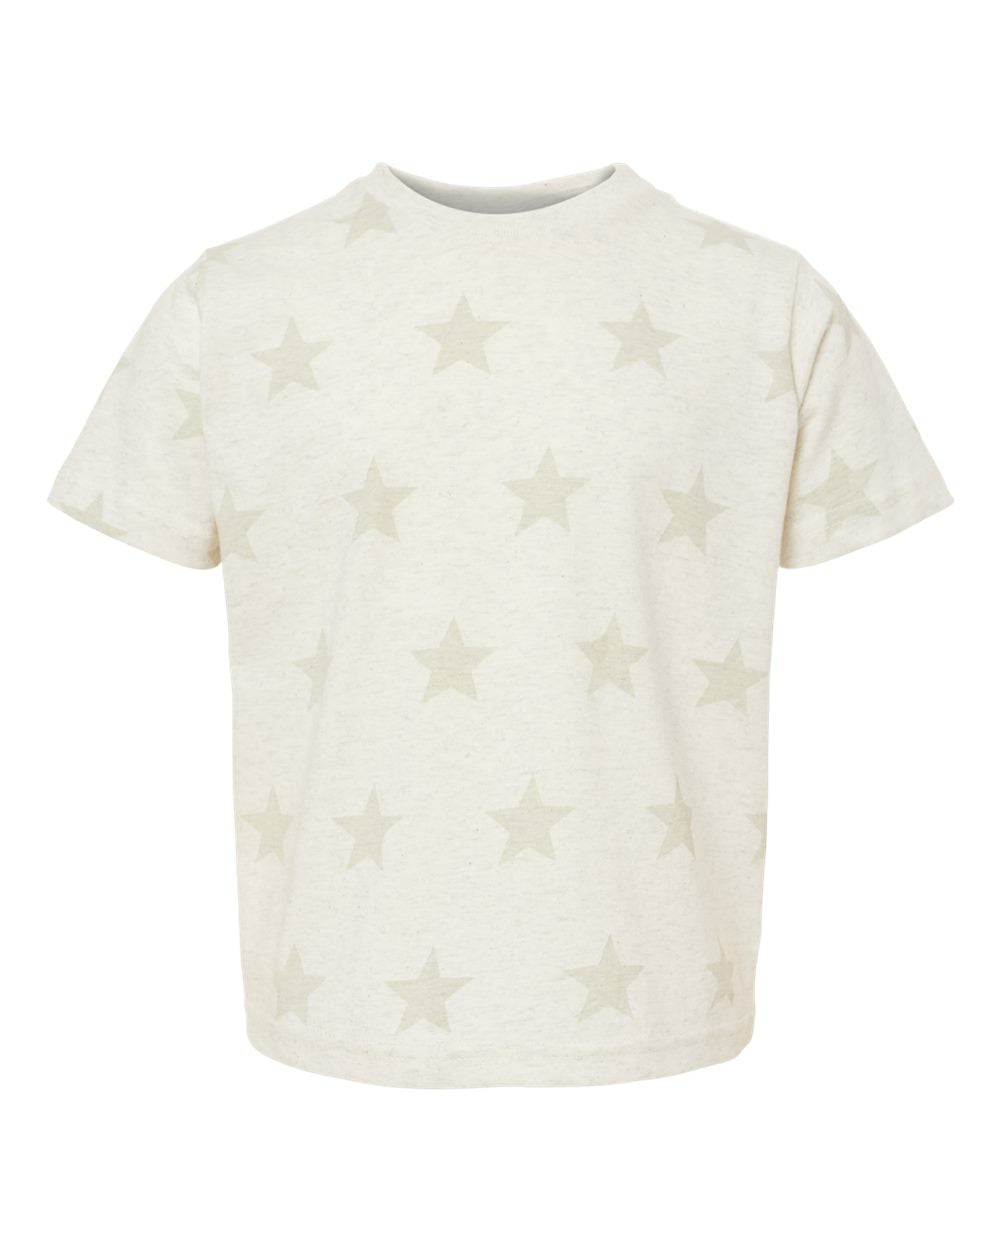 Code Five 3029 Toddler Tee - Natural Heather Star